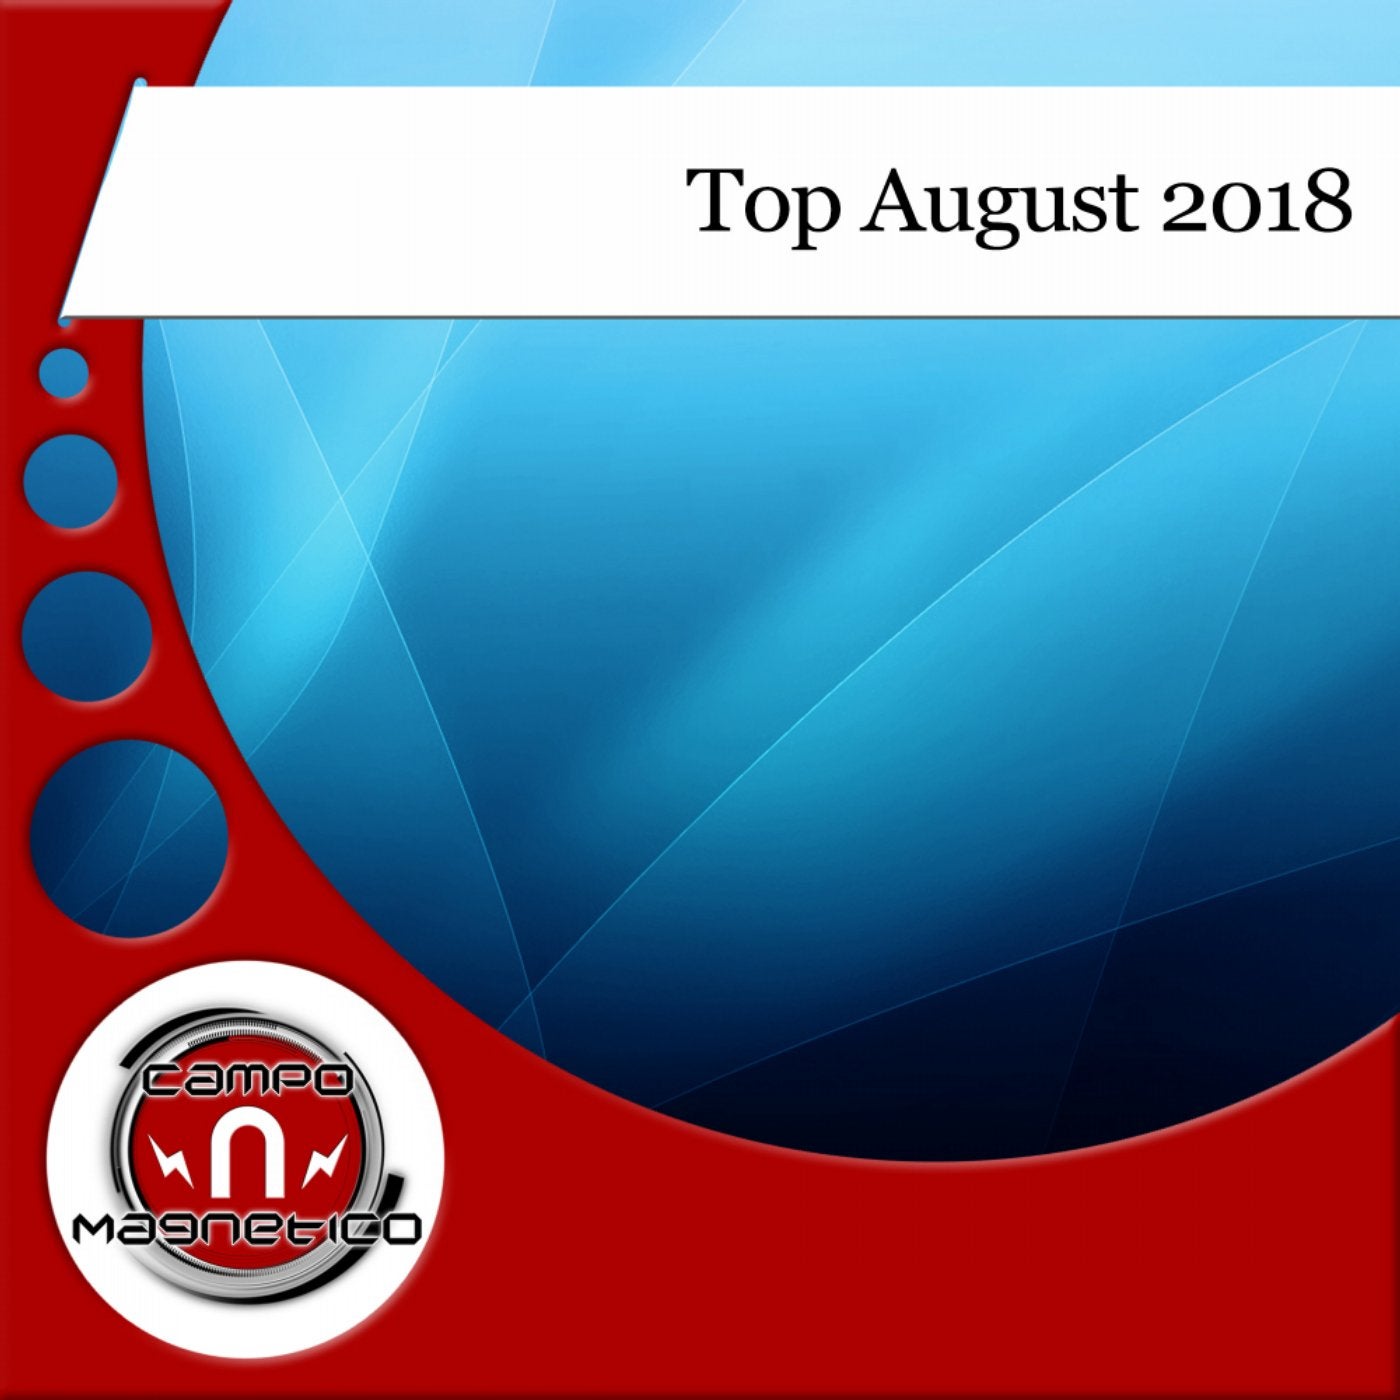 Top August 2018